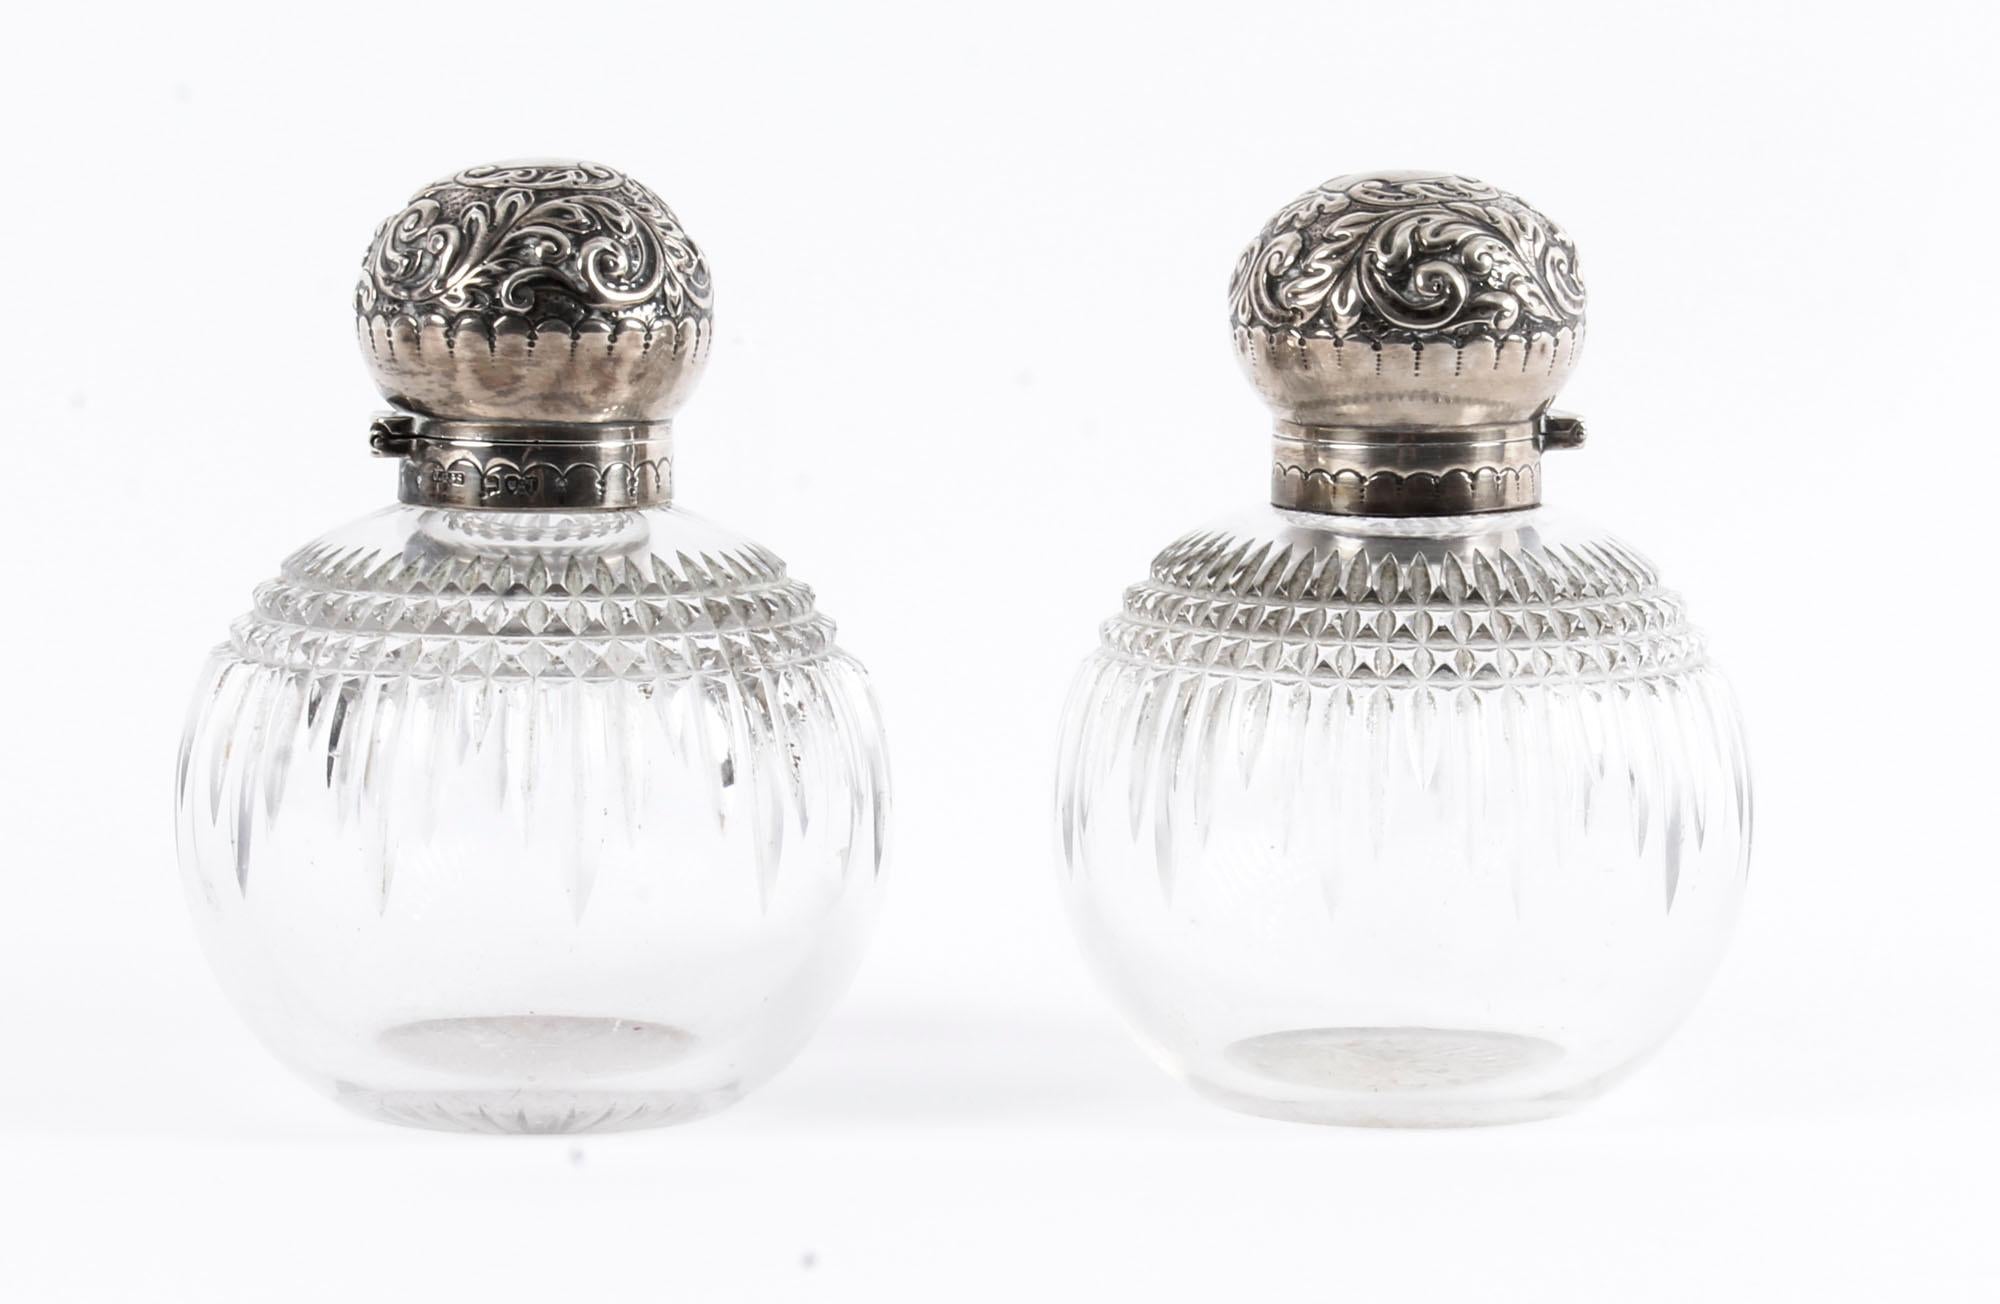 Antique Pair of Sterling Silver Top Cut Glass Perfume Bottles 1894, 19th Century 6